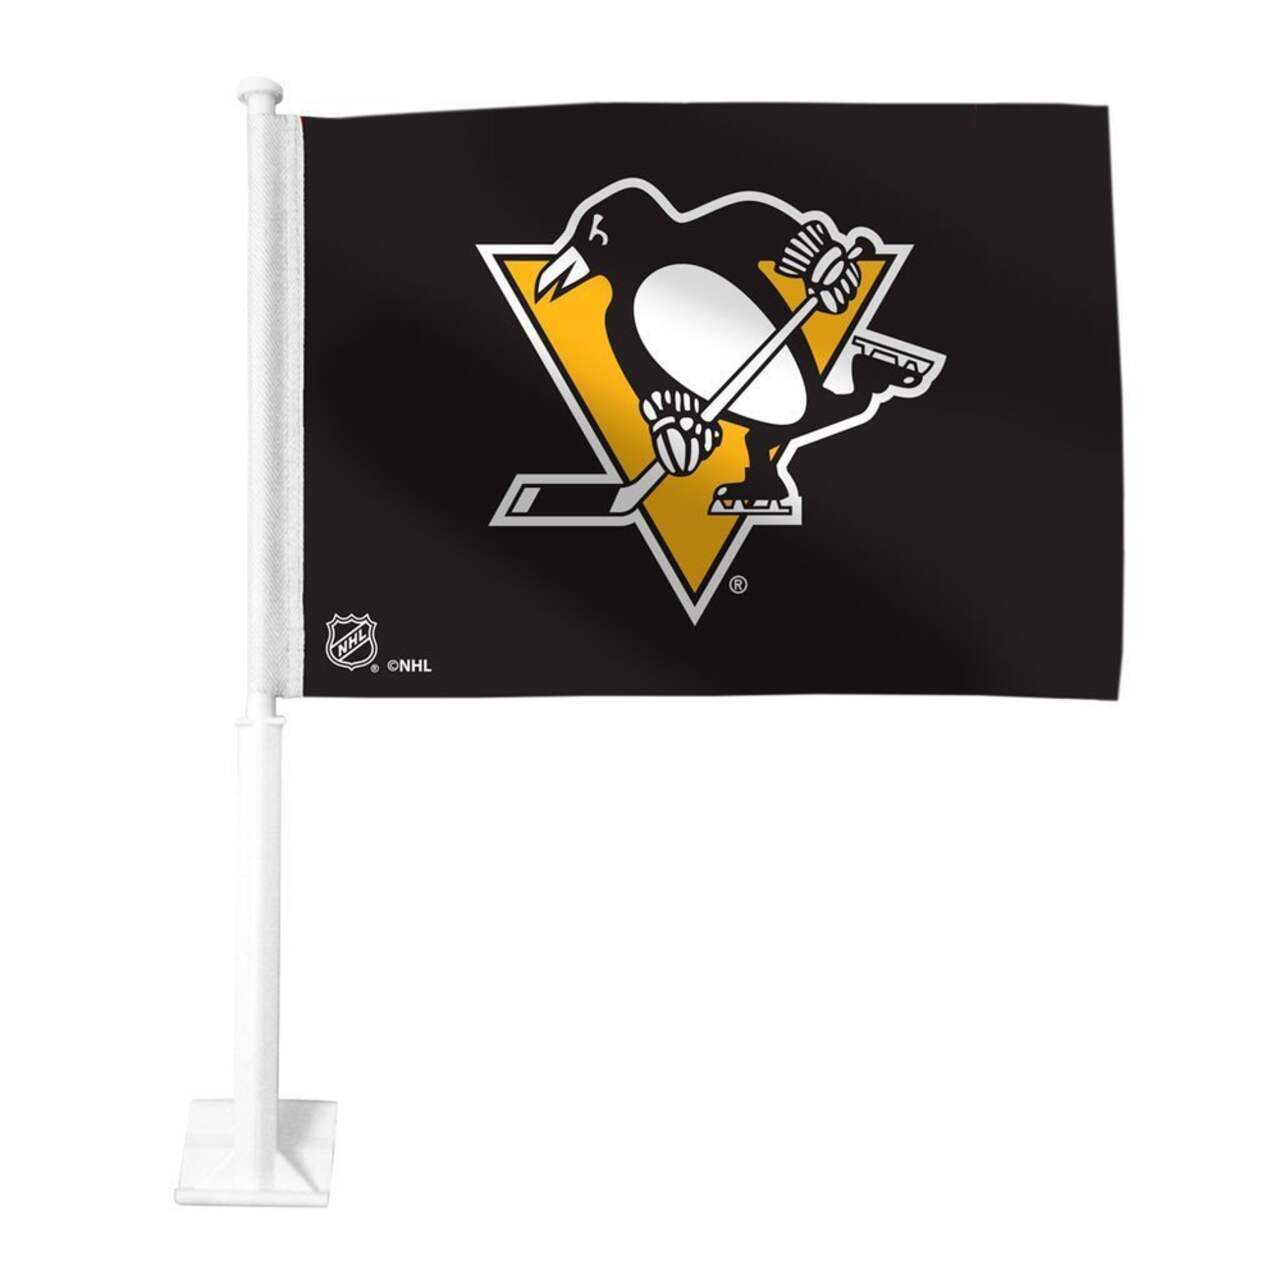 https://media-www.canadiantire.ca/product/playing/hockey/hockey-accessories/0836634/car-flag-pittsburgh-penguins-06c0d07b-2015-48f8-af51-4cb66e67b48c.png?imdensity=1&imwidth=640&impolicy=mZoom